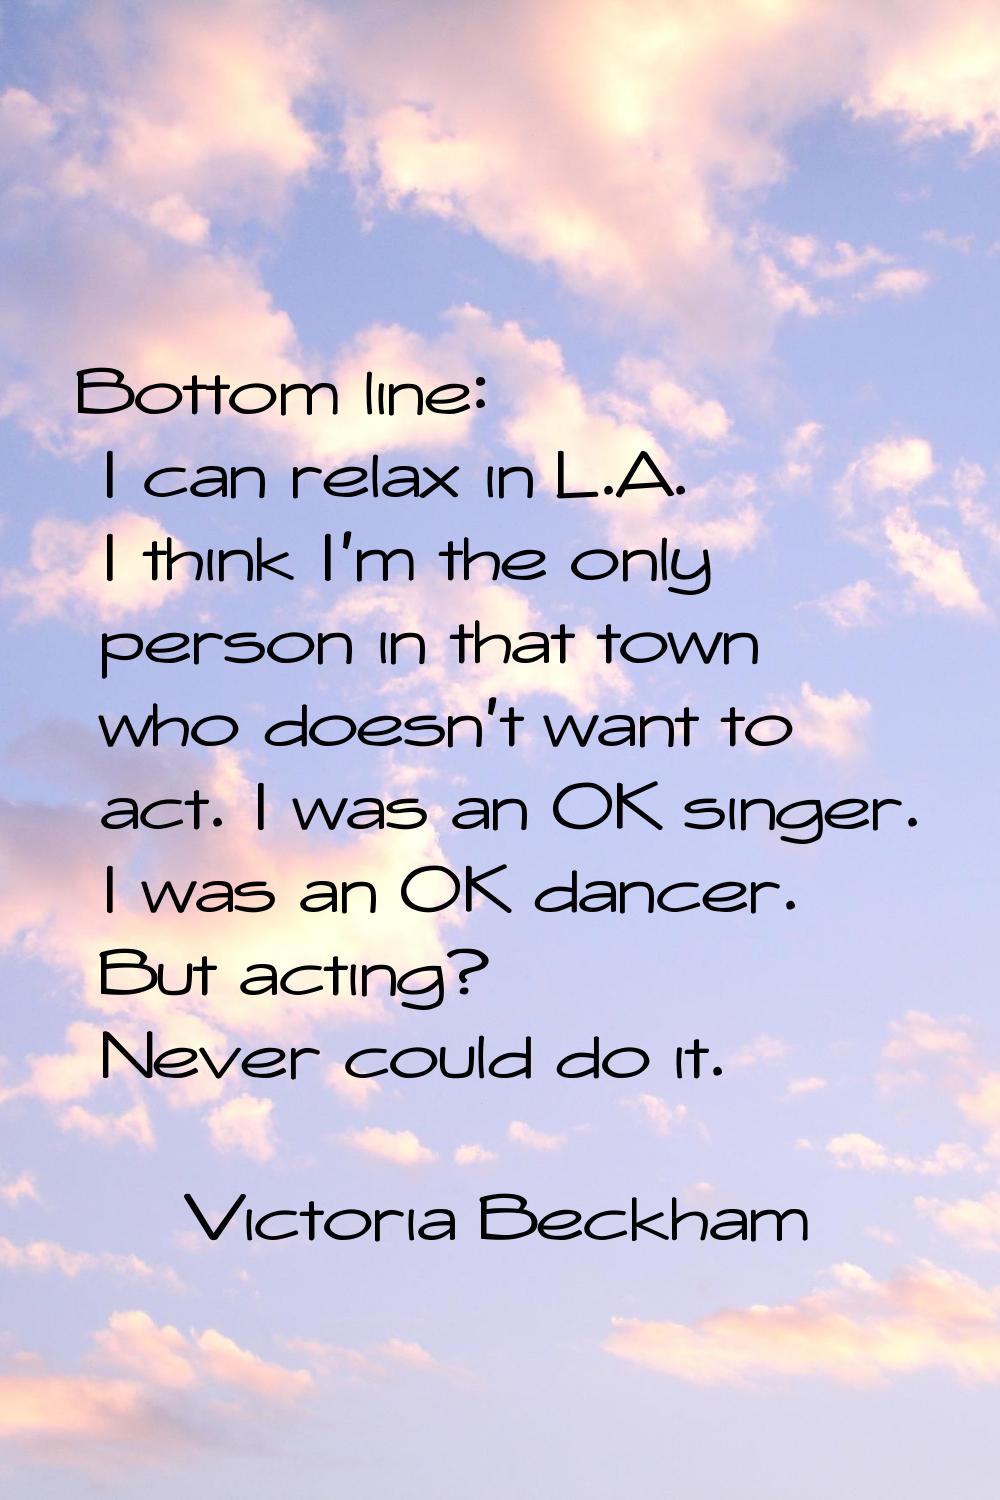 Bottom line: I can relax in L.A. I think I'm the only person in that town who doesn't want to act. 